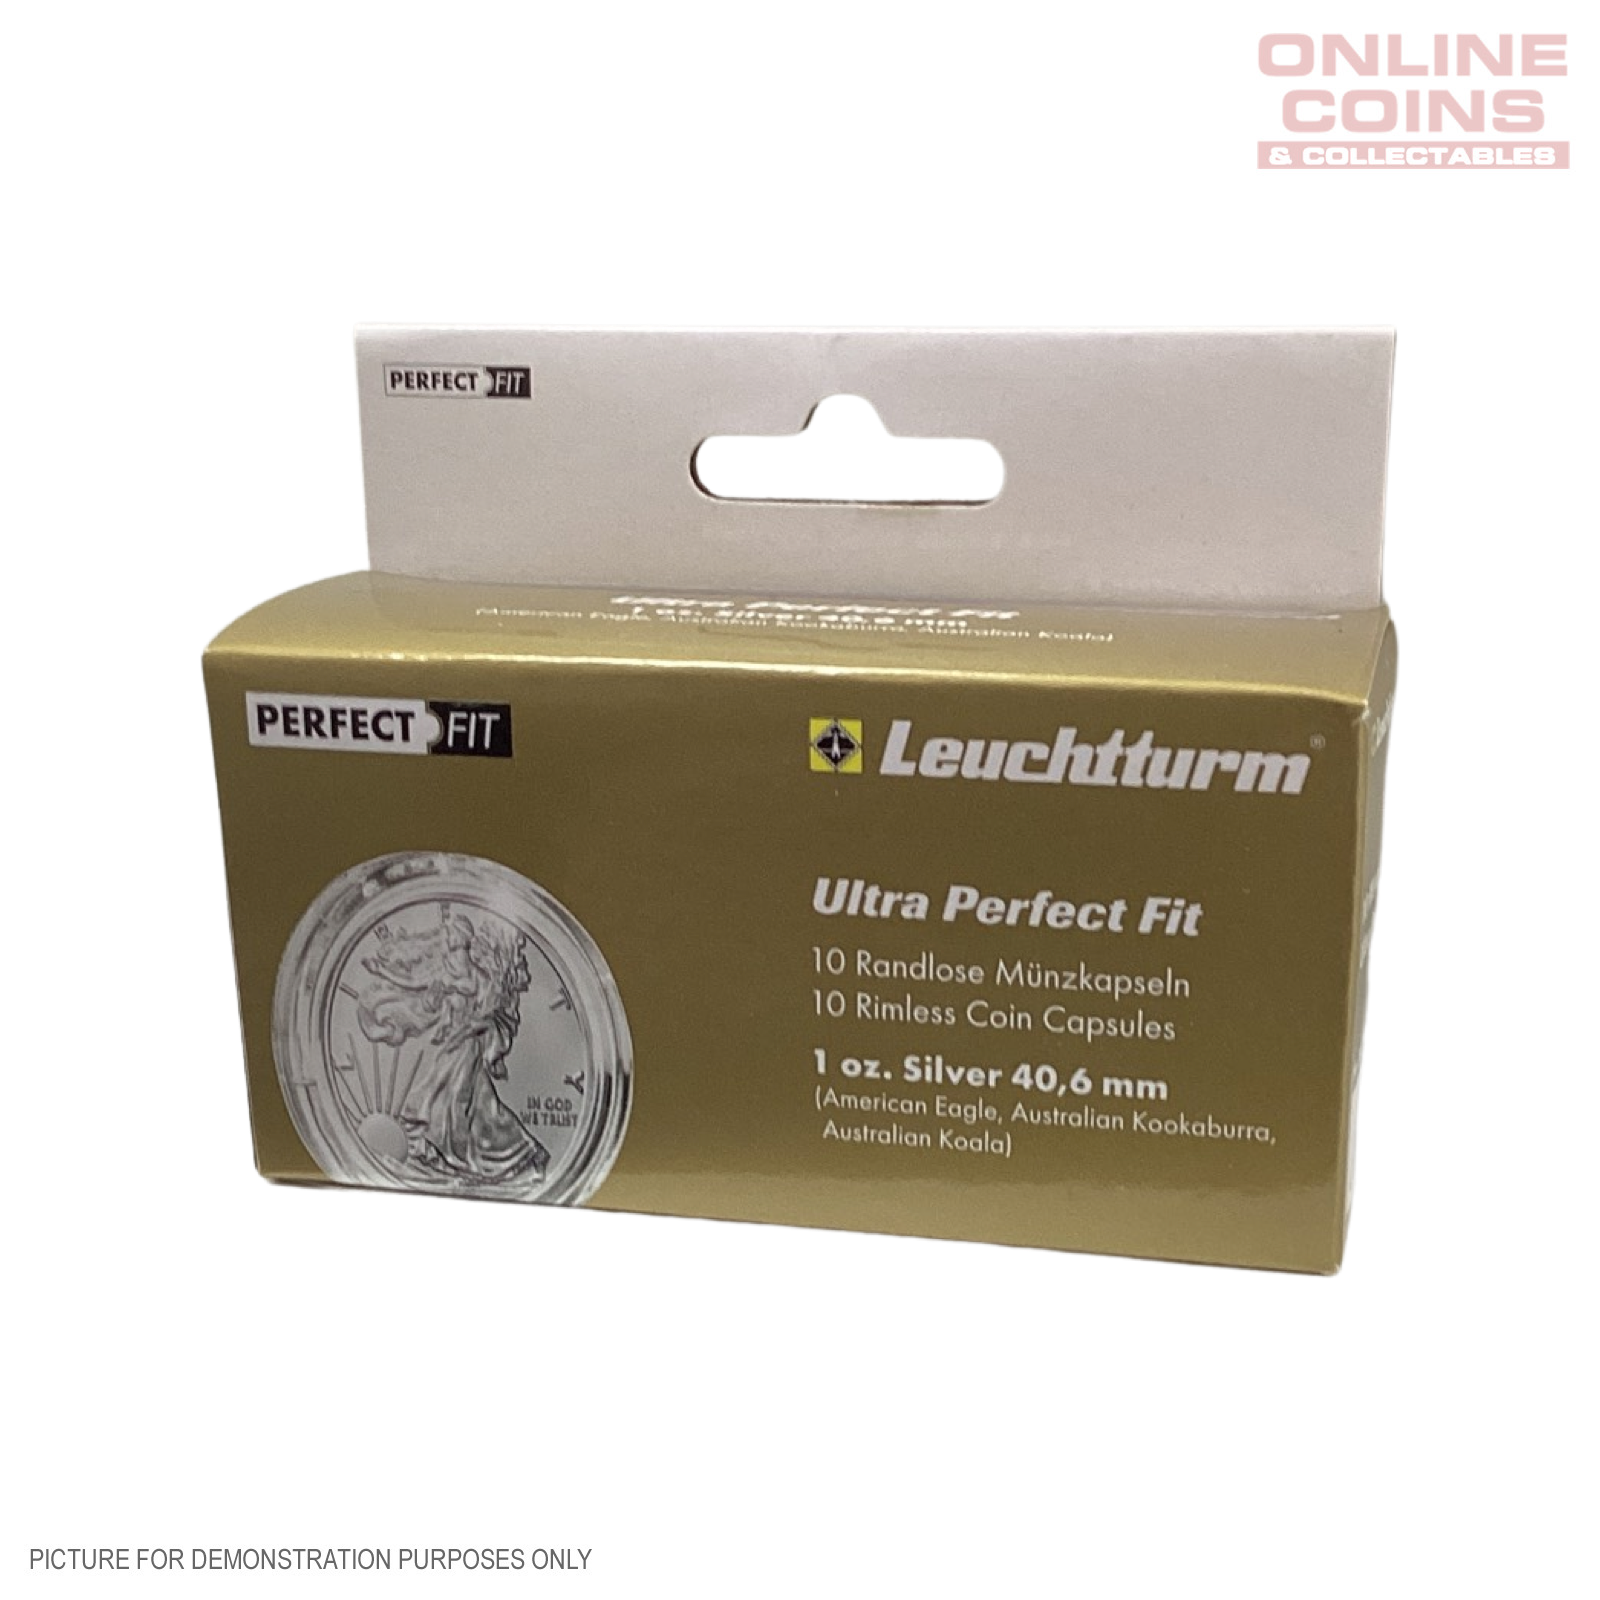 Lighthouse ULTRA PERFECT FIT 40.6mm Coin Capsules - Suit 1oz Silver American Eagle